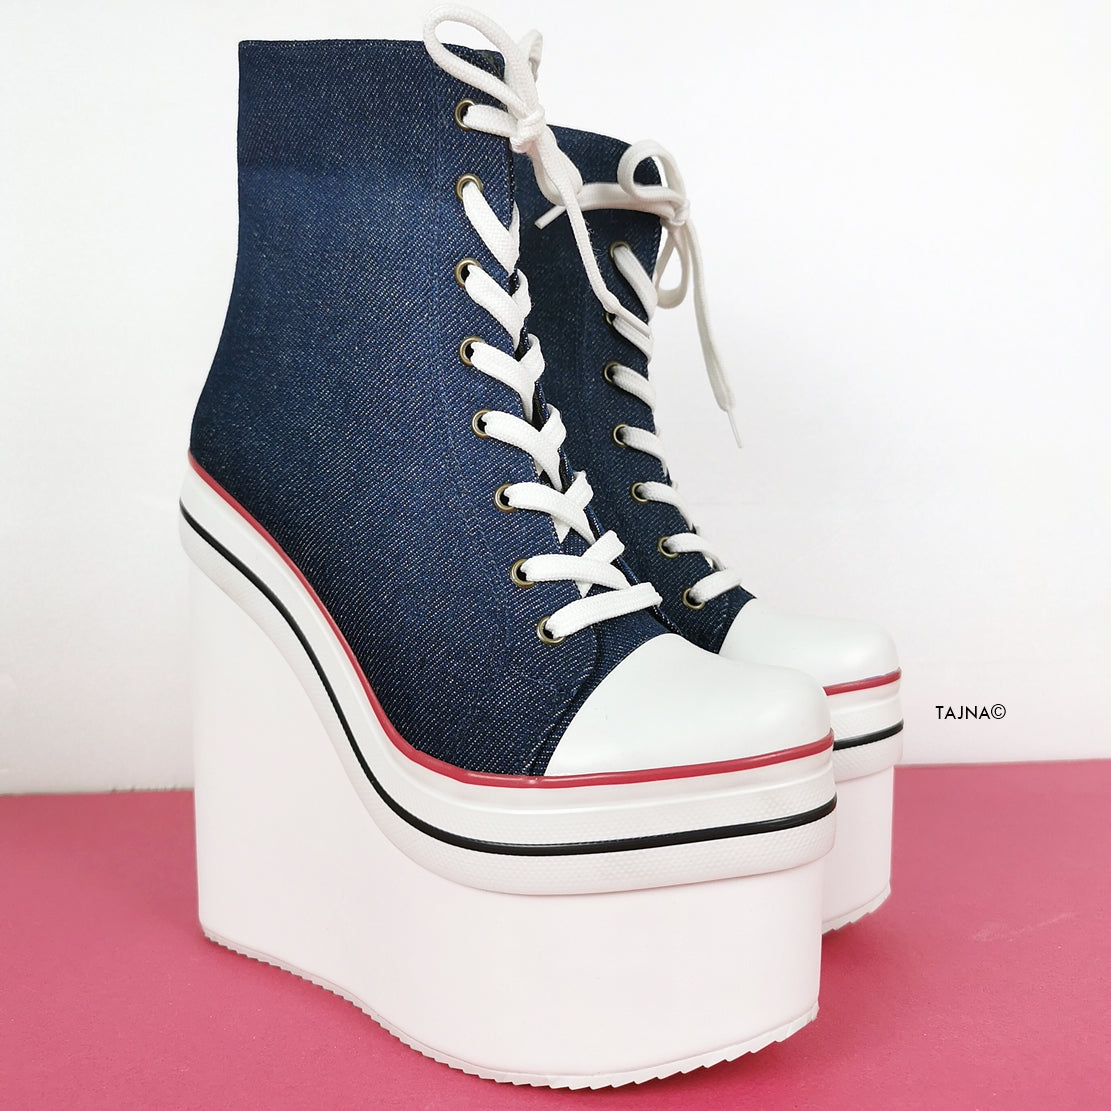 Women High Top Wedge Heel Sneakers Platform Lace Up Shoes Ankle Bootie